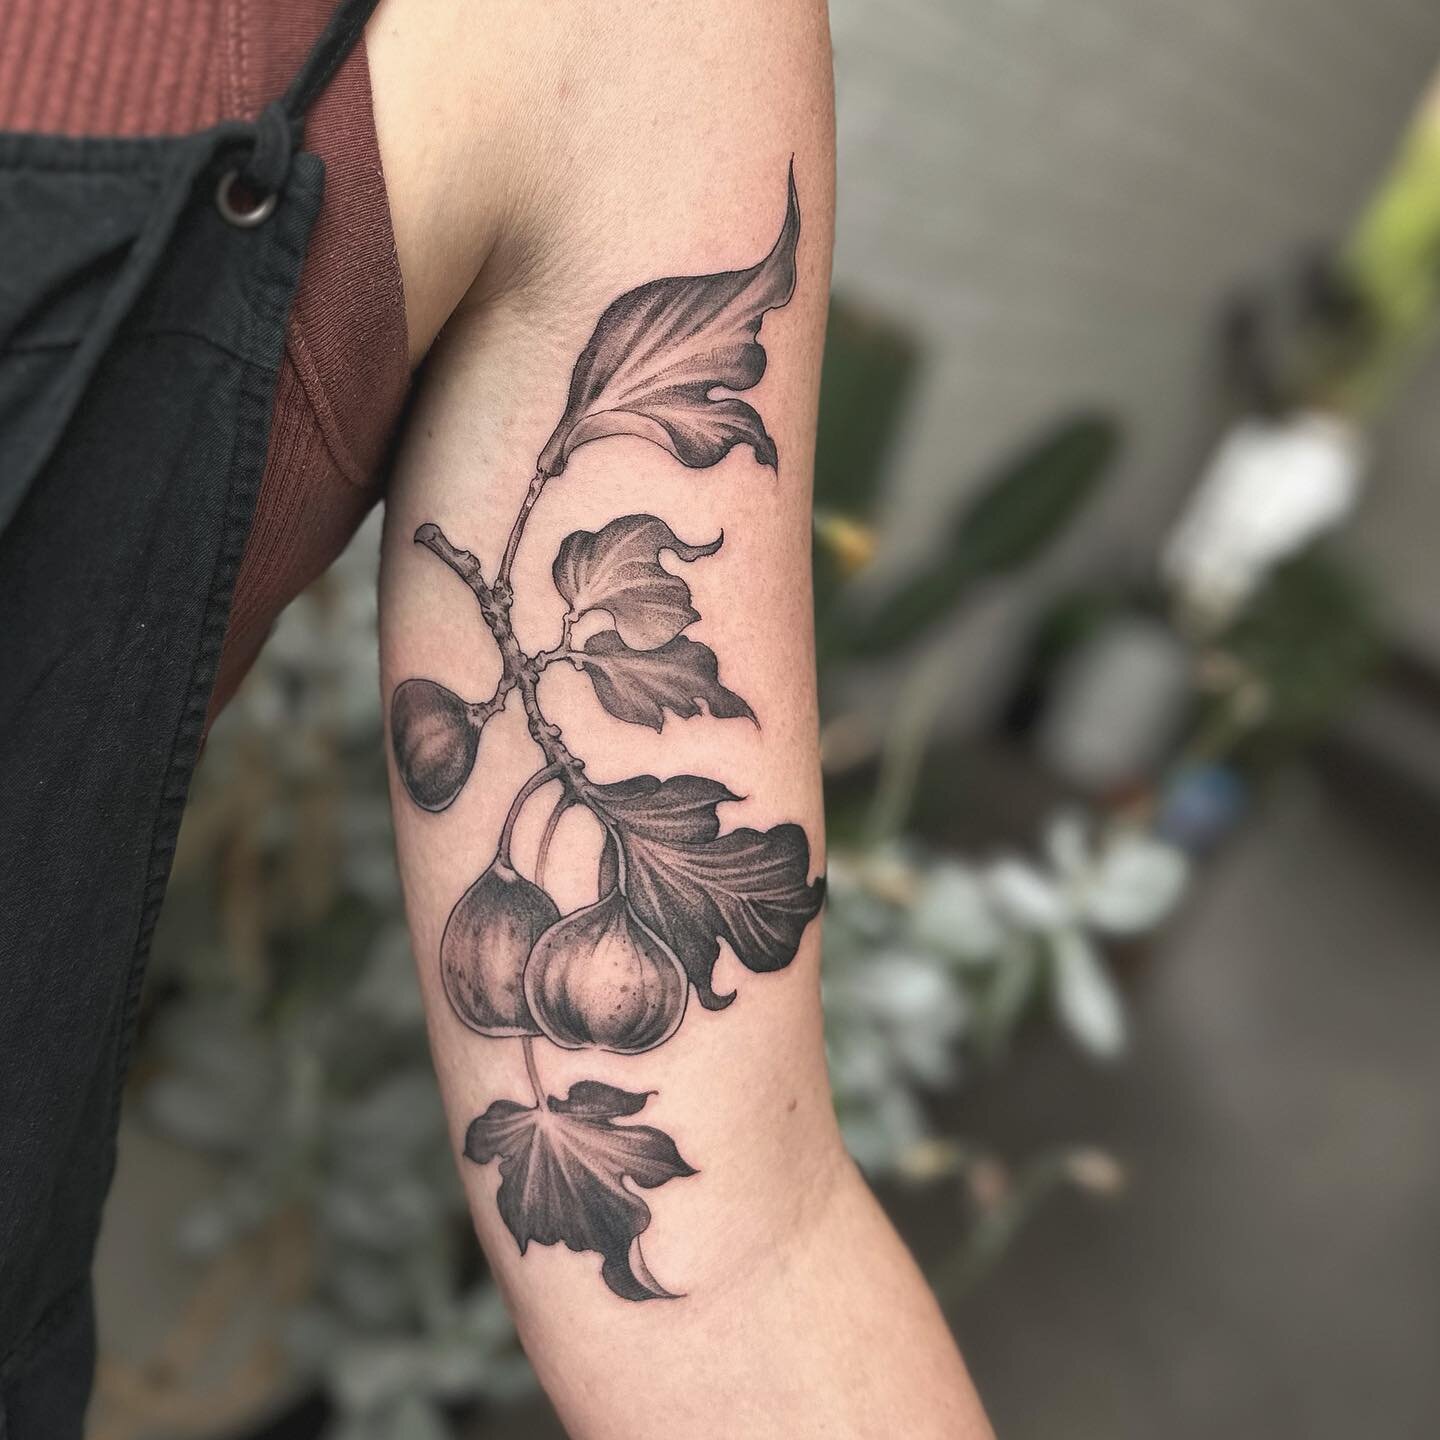 💖

&bull;:&bull; repost due to blurry video ✨ 
.
.
.
.
.
.
#perthtattoo#perthtattooartists#perthtattooartist#botanicaltattoo#figtattoo